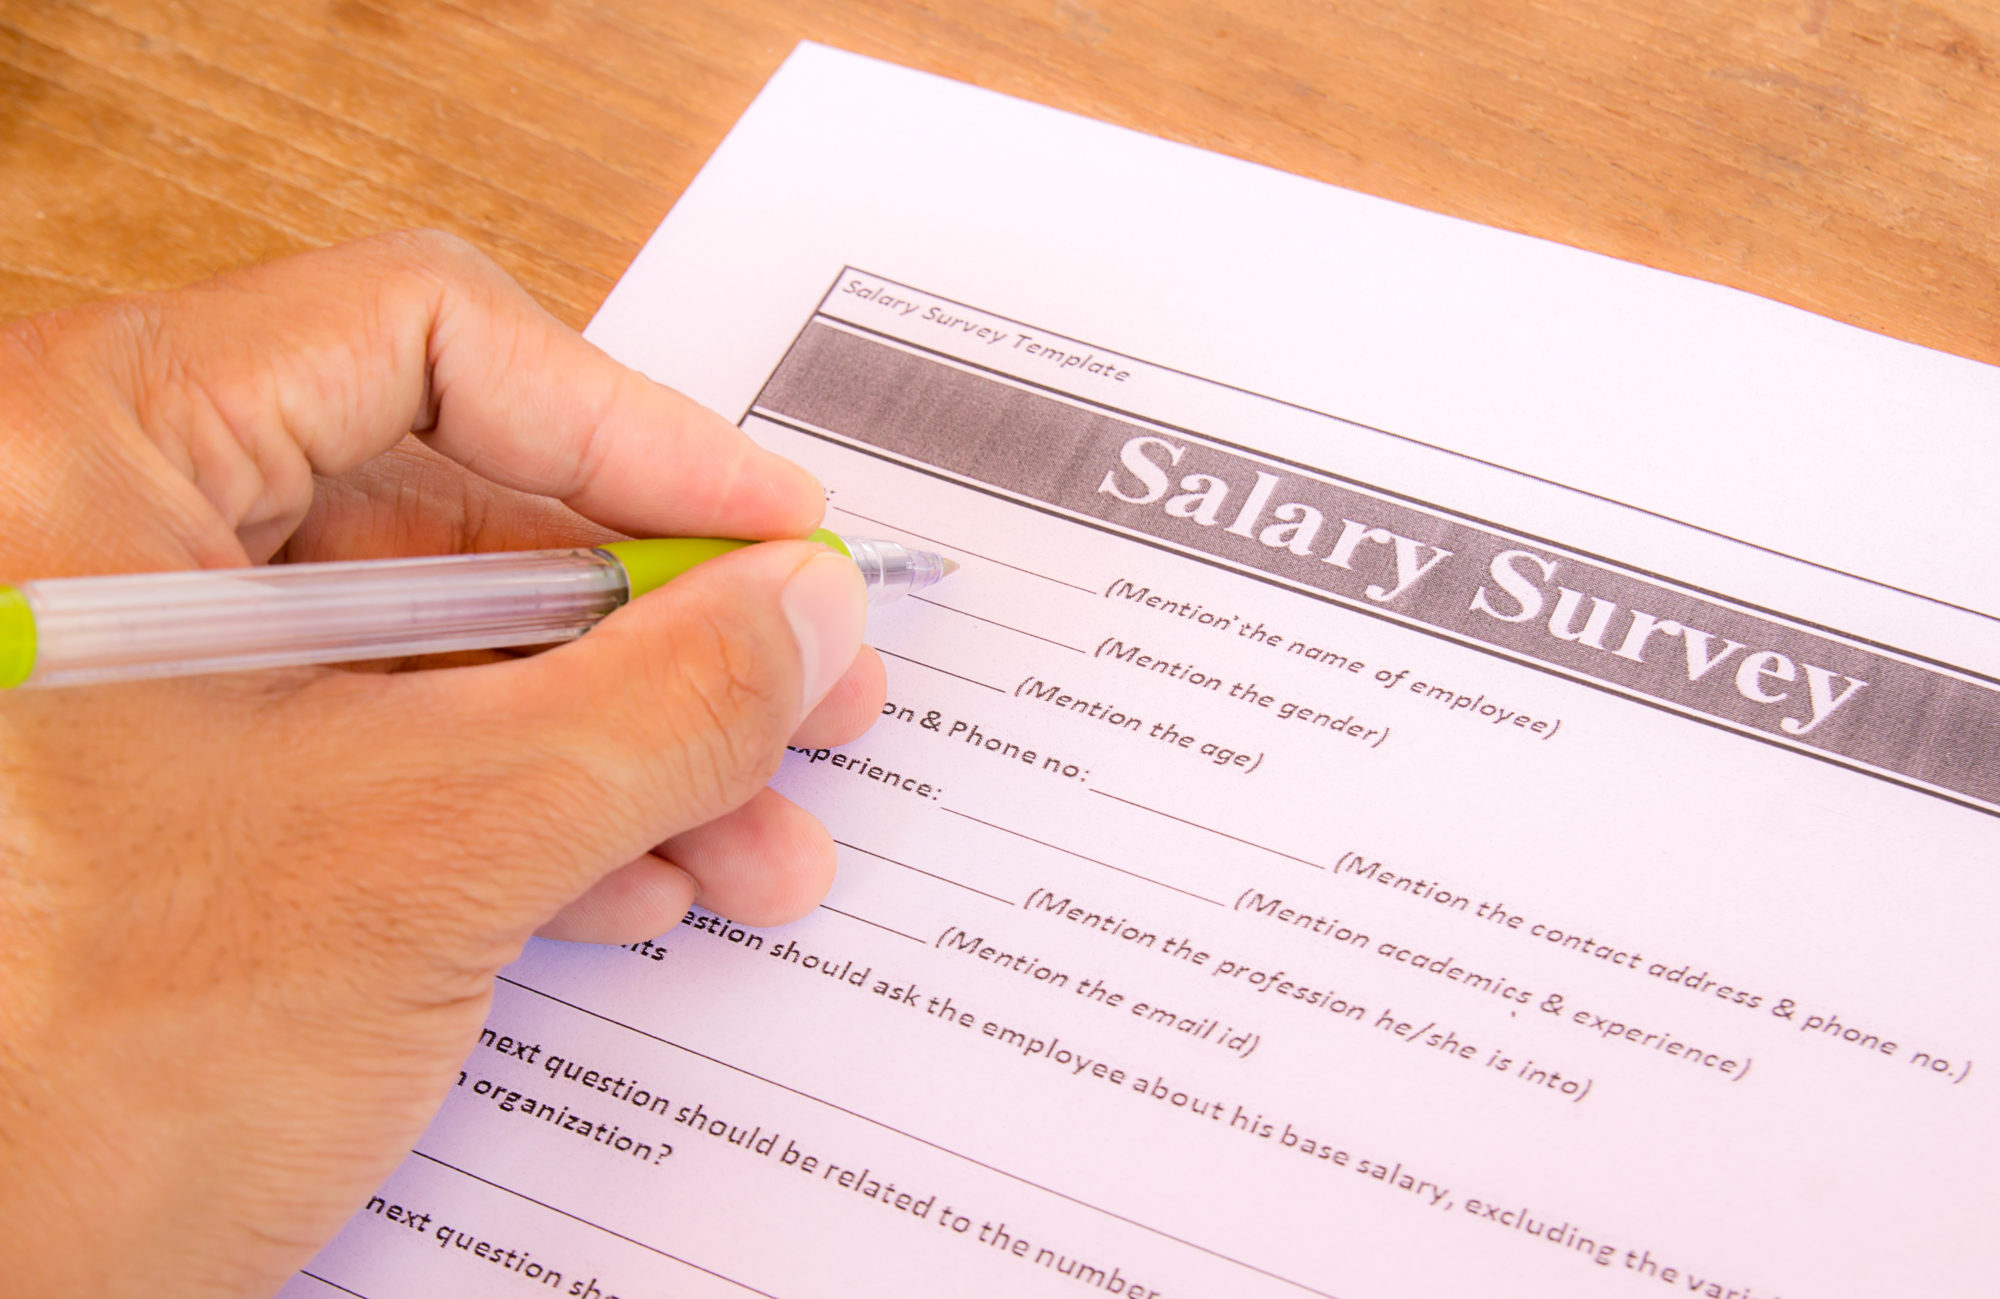 Is Your Service Manager Satisfied with Their Compensation?